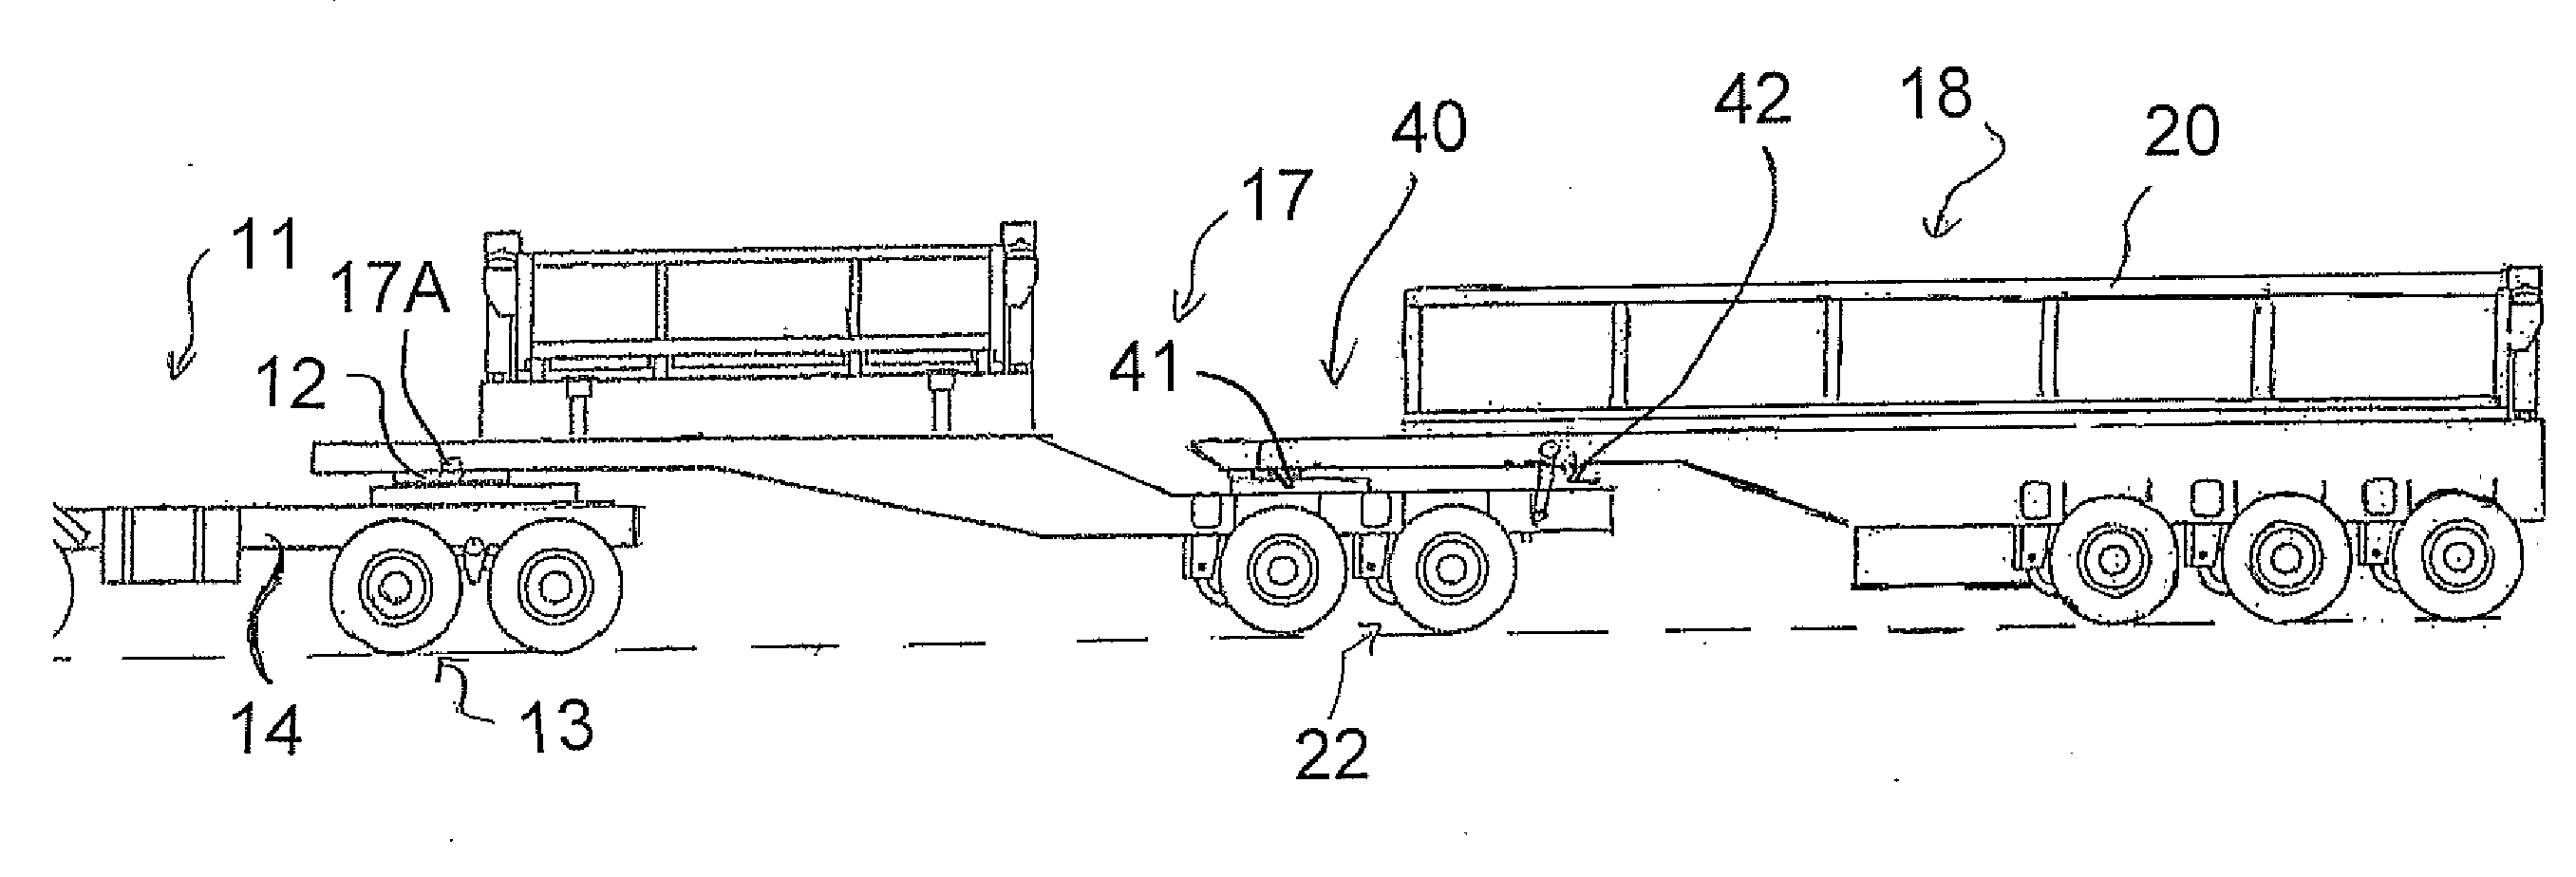 Dual trailer with lifting wheels for transport when empty